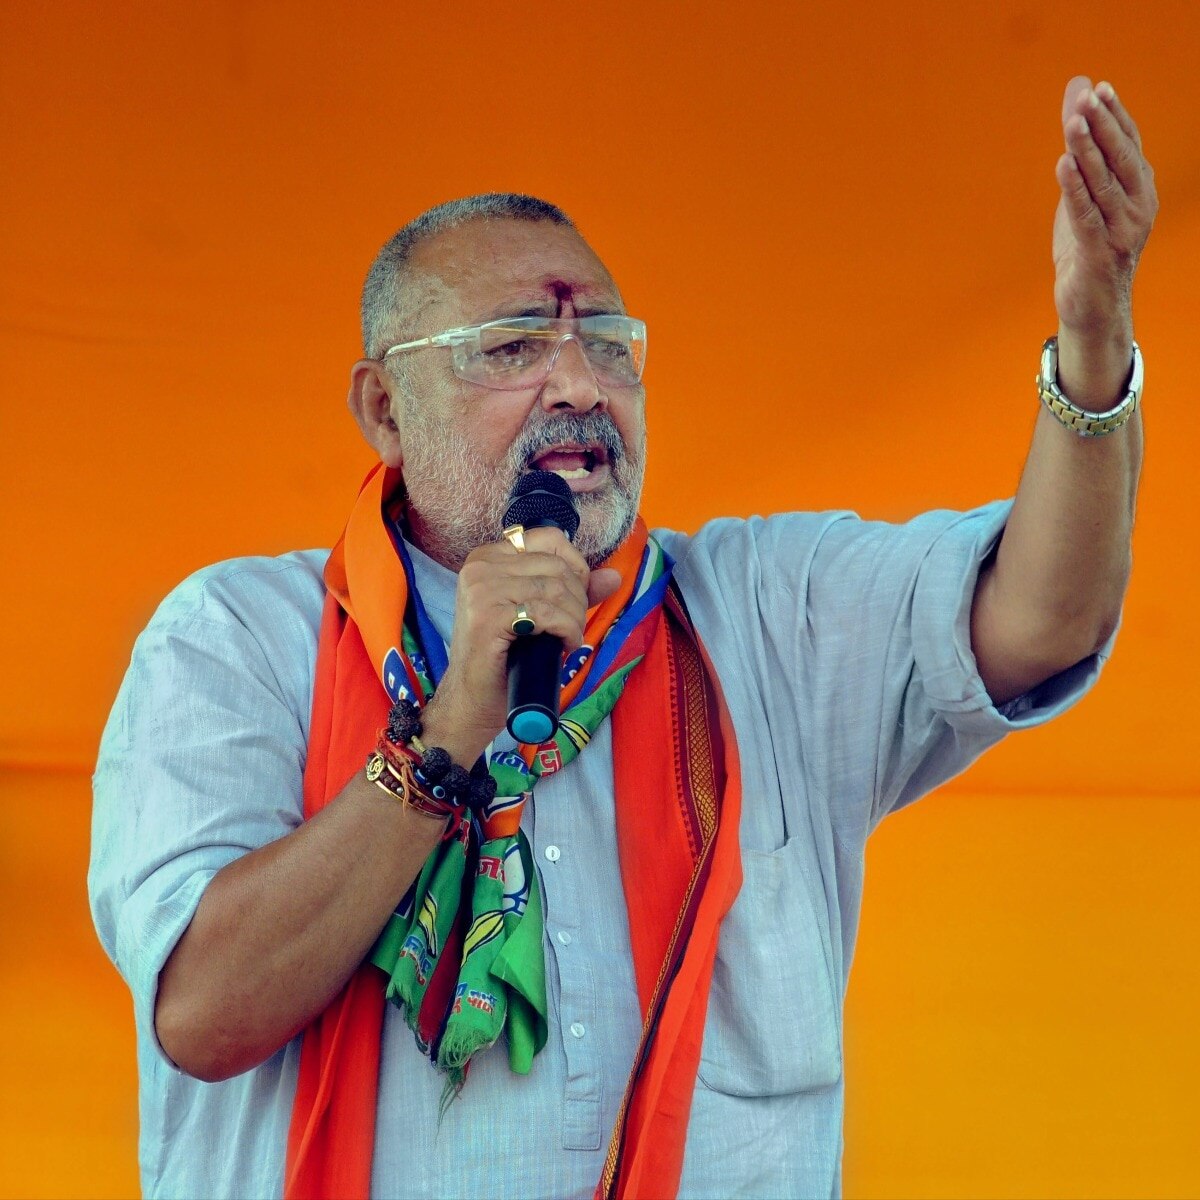 Giriraj Singh calls upon every voter in Begusarai to cast a vote as every vote counts for Narendra Modi's mission to secure over 400 seats. #feedmile #vote #NarendraModi #win #BJP #candidate #Begusarai #GirirajSingh #appeals #voters